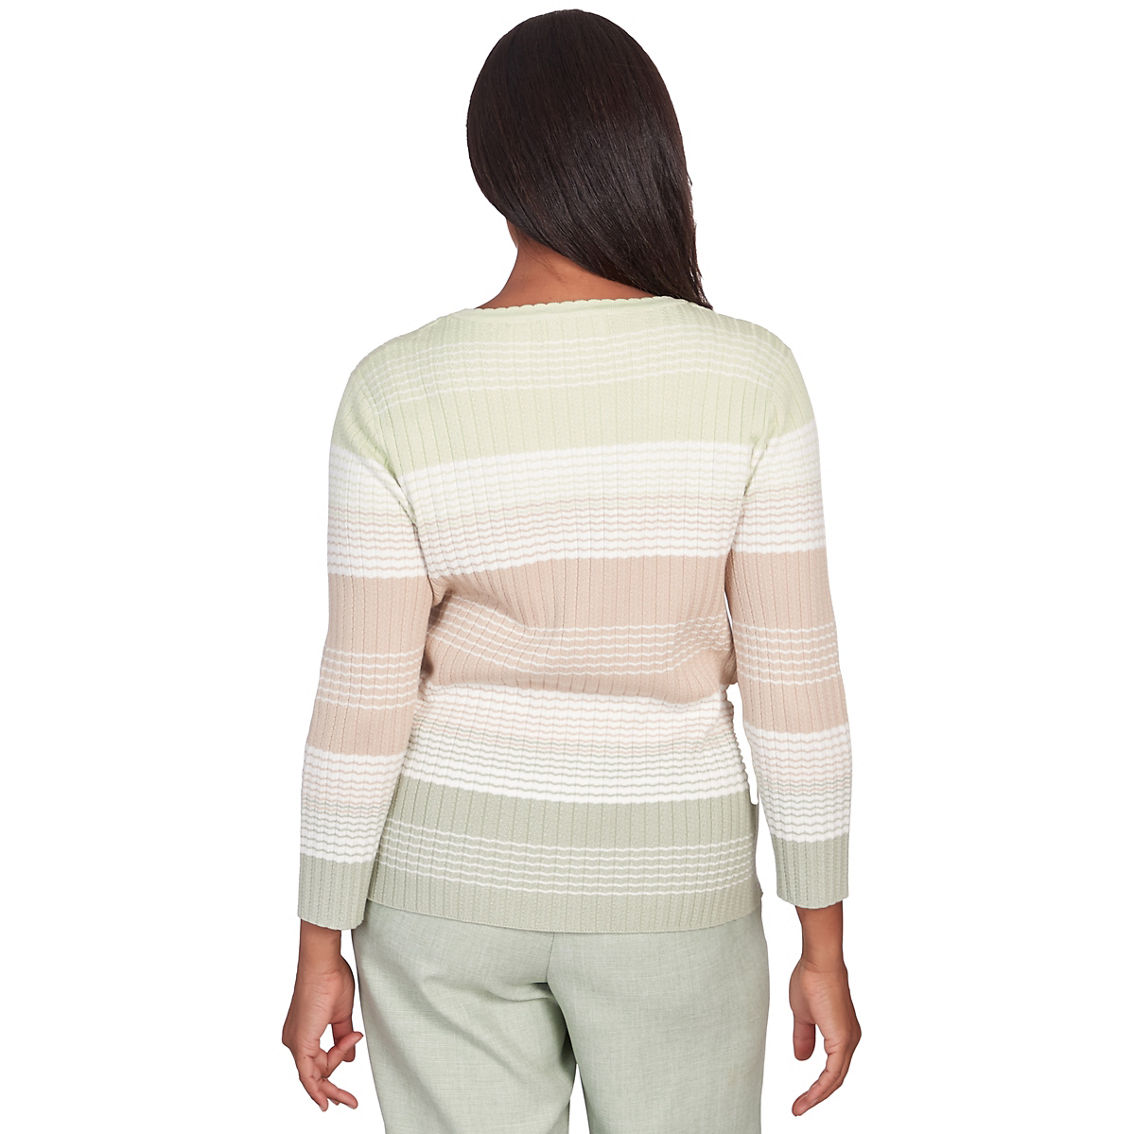 Alfred Dunner Petite English Garden Texture Stripe Crew Neck Sweater With Necklace - Image 2 of 4